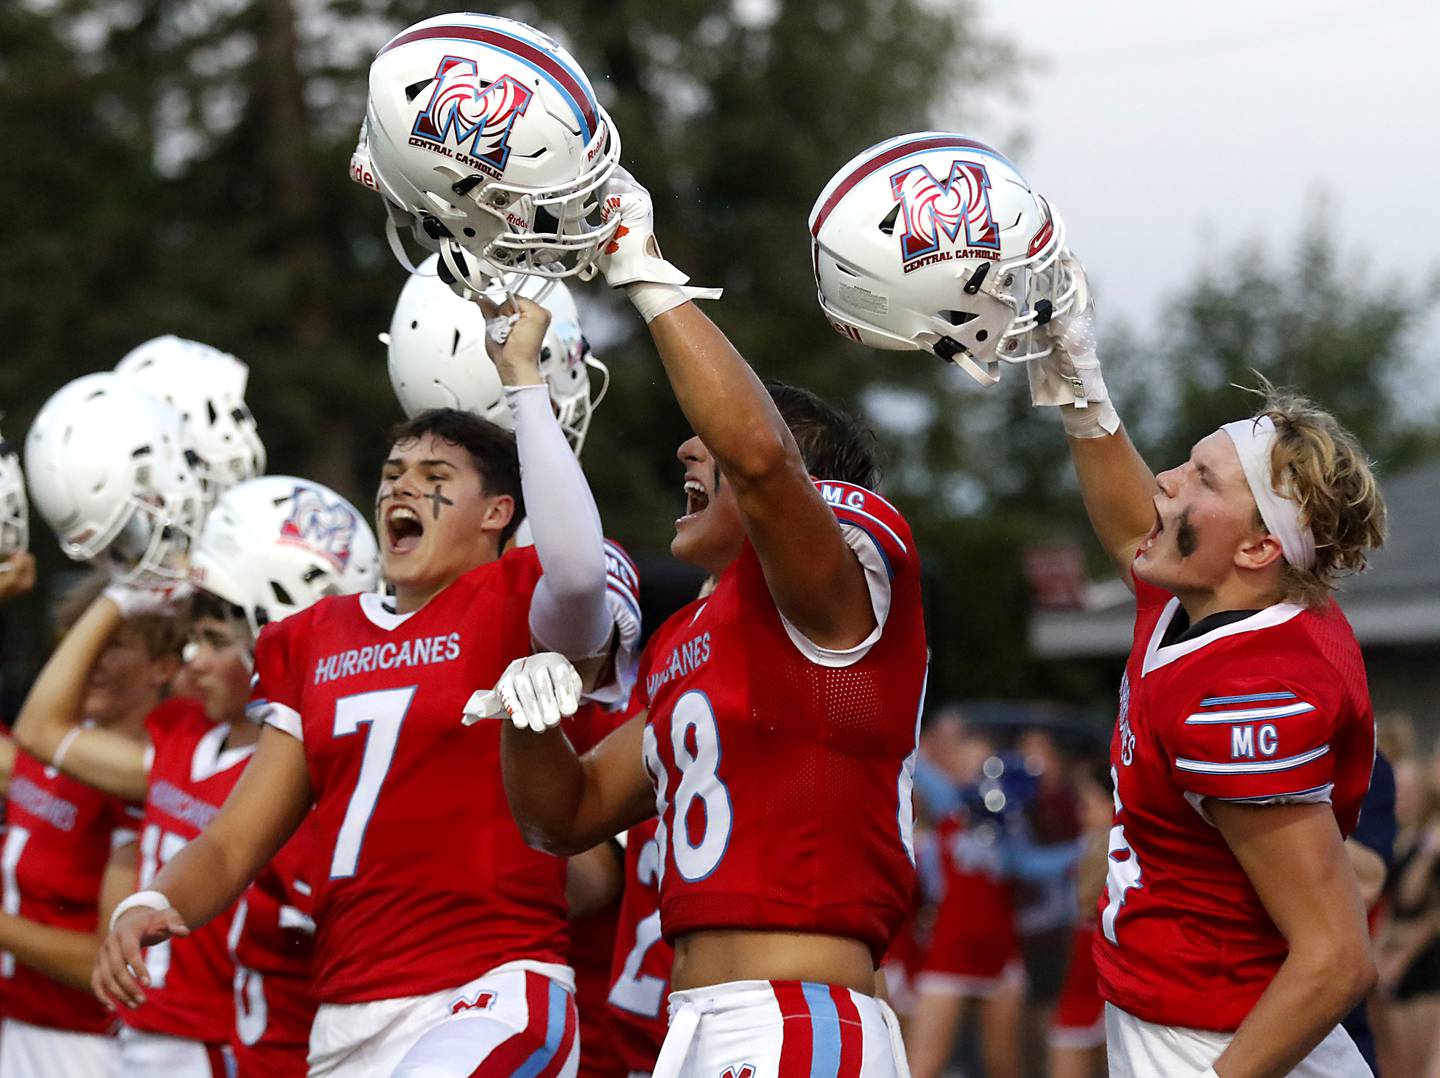 Marian Central's Cale McThenia, Christian Bentancur, and Marian Central's Tyson Jakubowicz yell as the raise their helmets before the start of a nonconference football game against Richmond-Burton Friday, Aug. 25, 2023, at Marian Central Catholic High School.